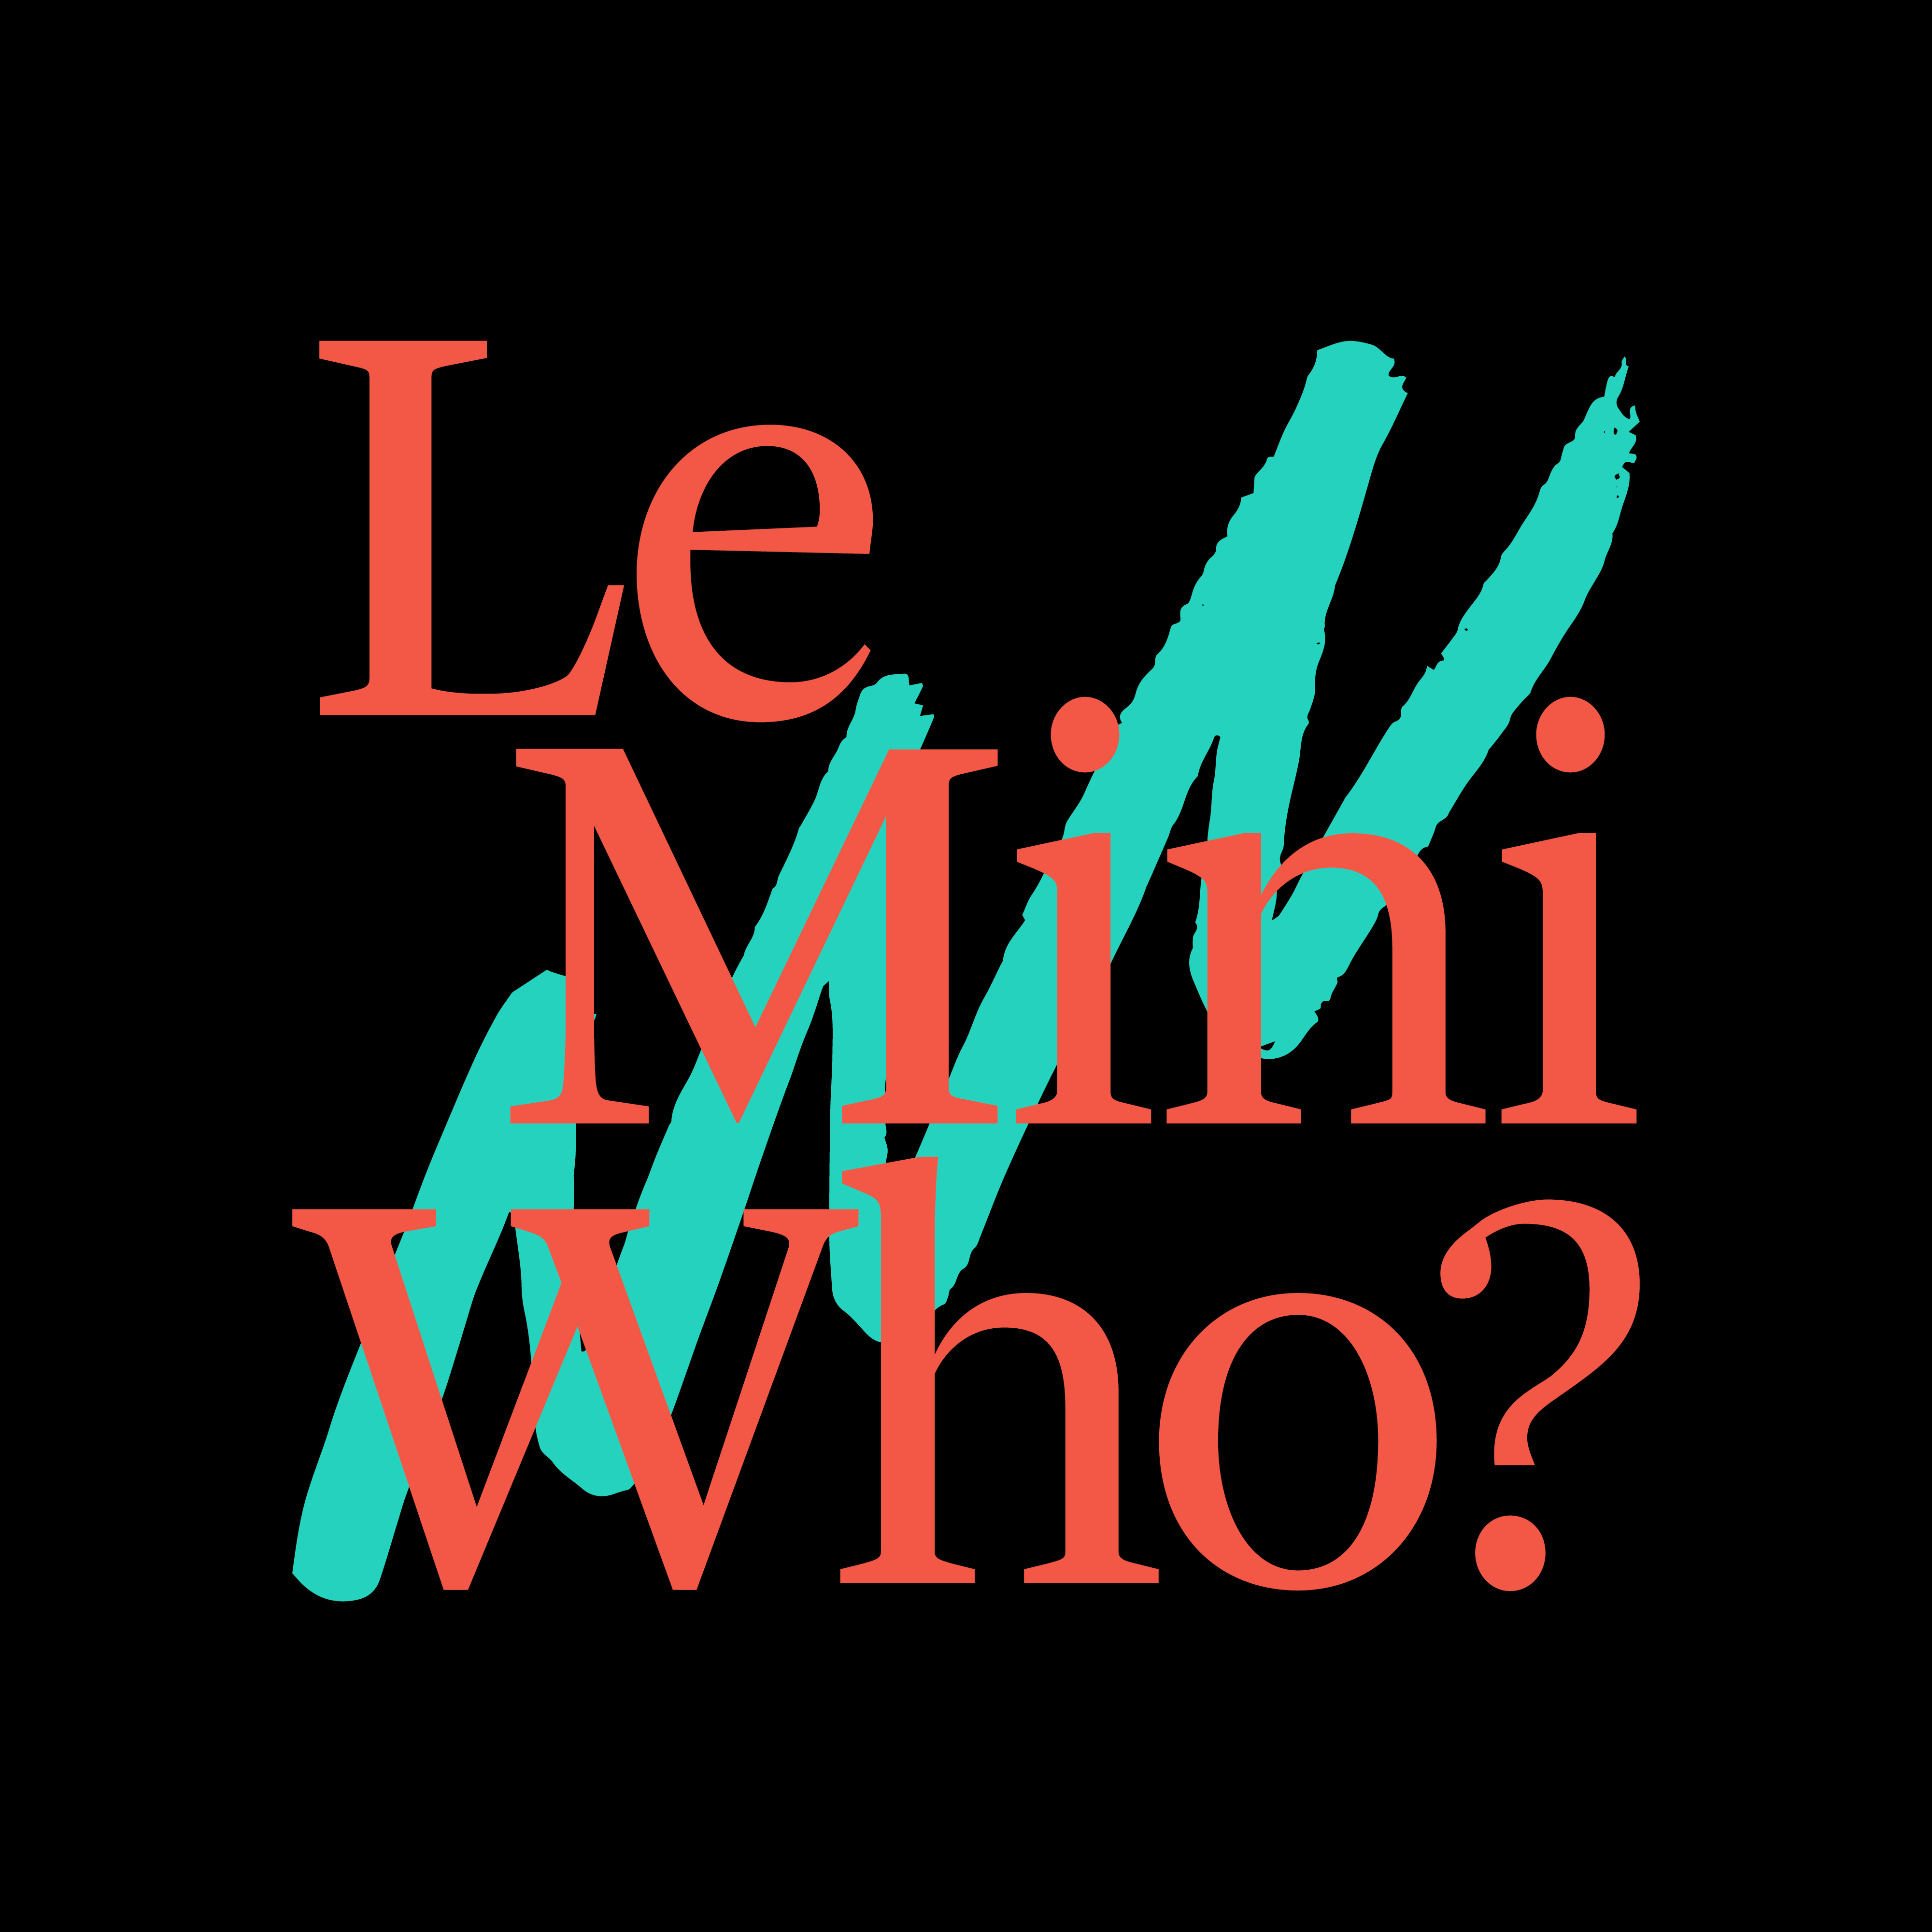 Le Mini Who? returns as part of LGW18; 10th Anniversary edition marks move to Rotsoord